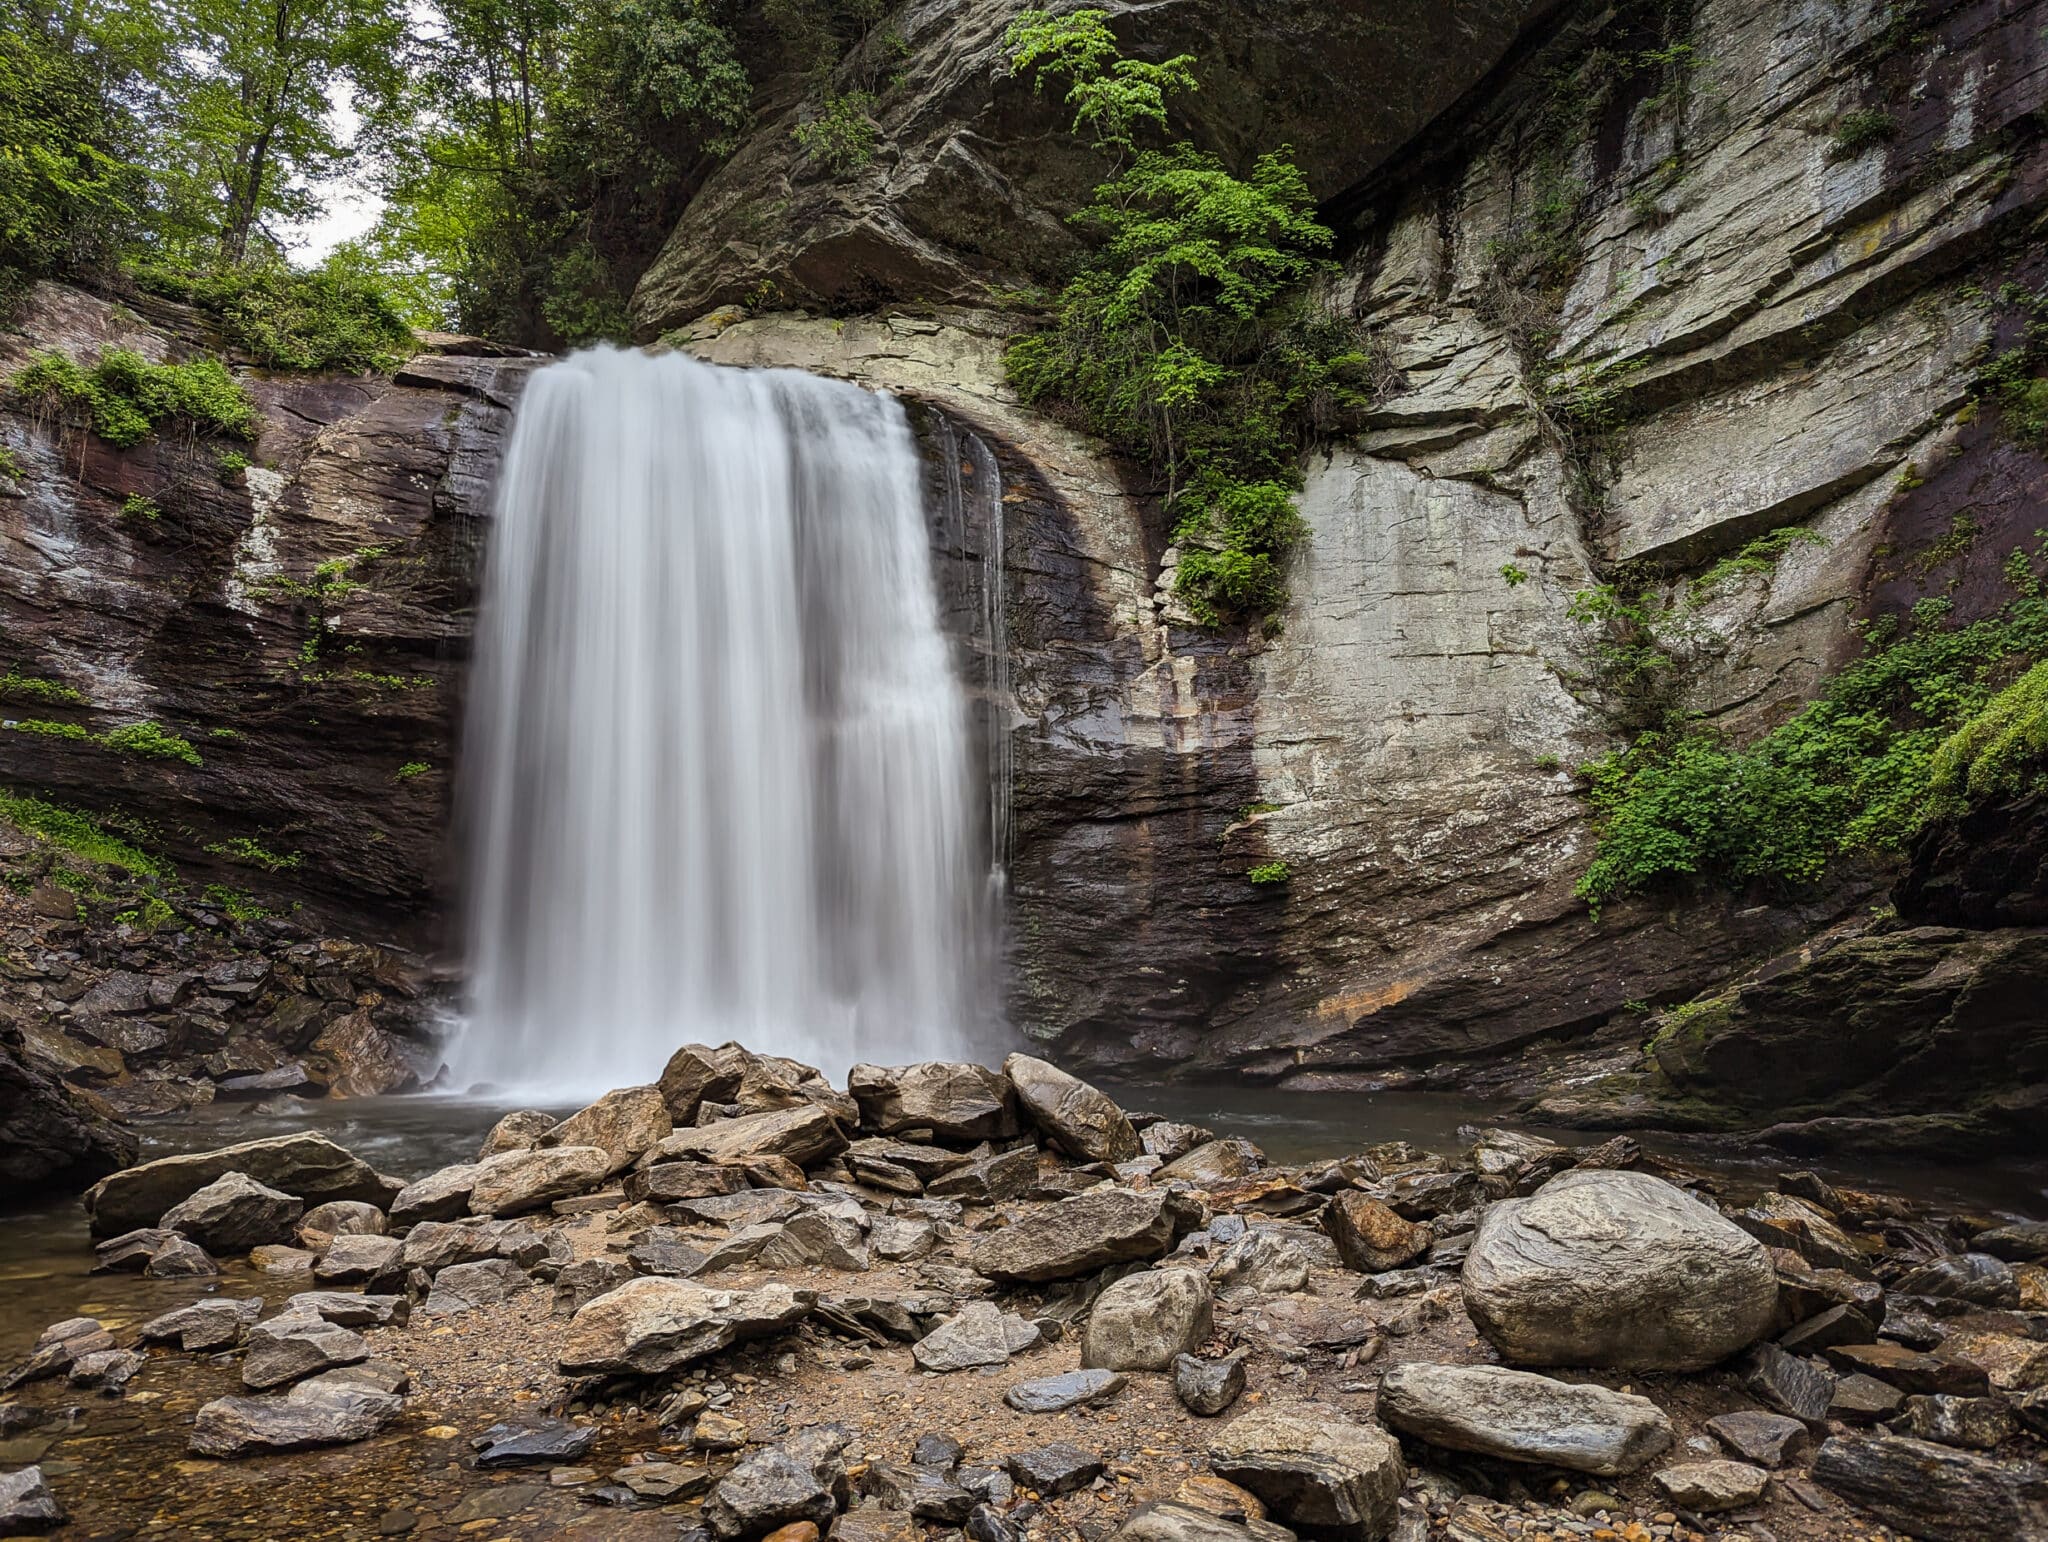 A photo of a waterfall in North Carolina with grey rocks and bright white water